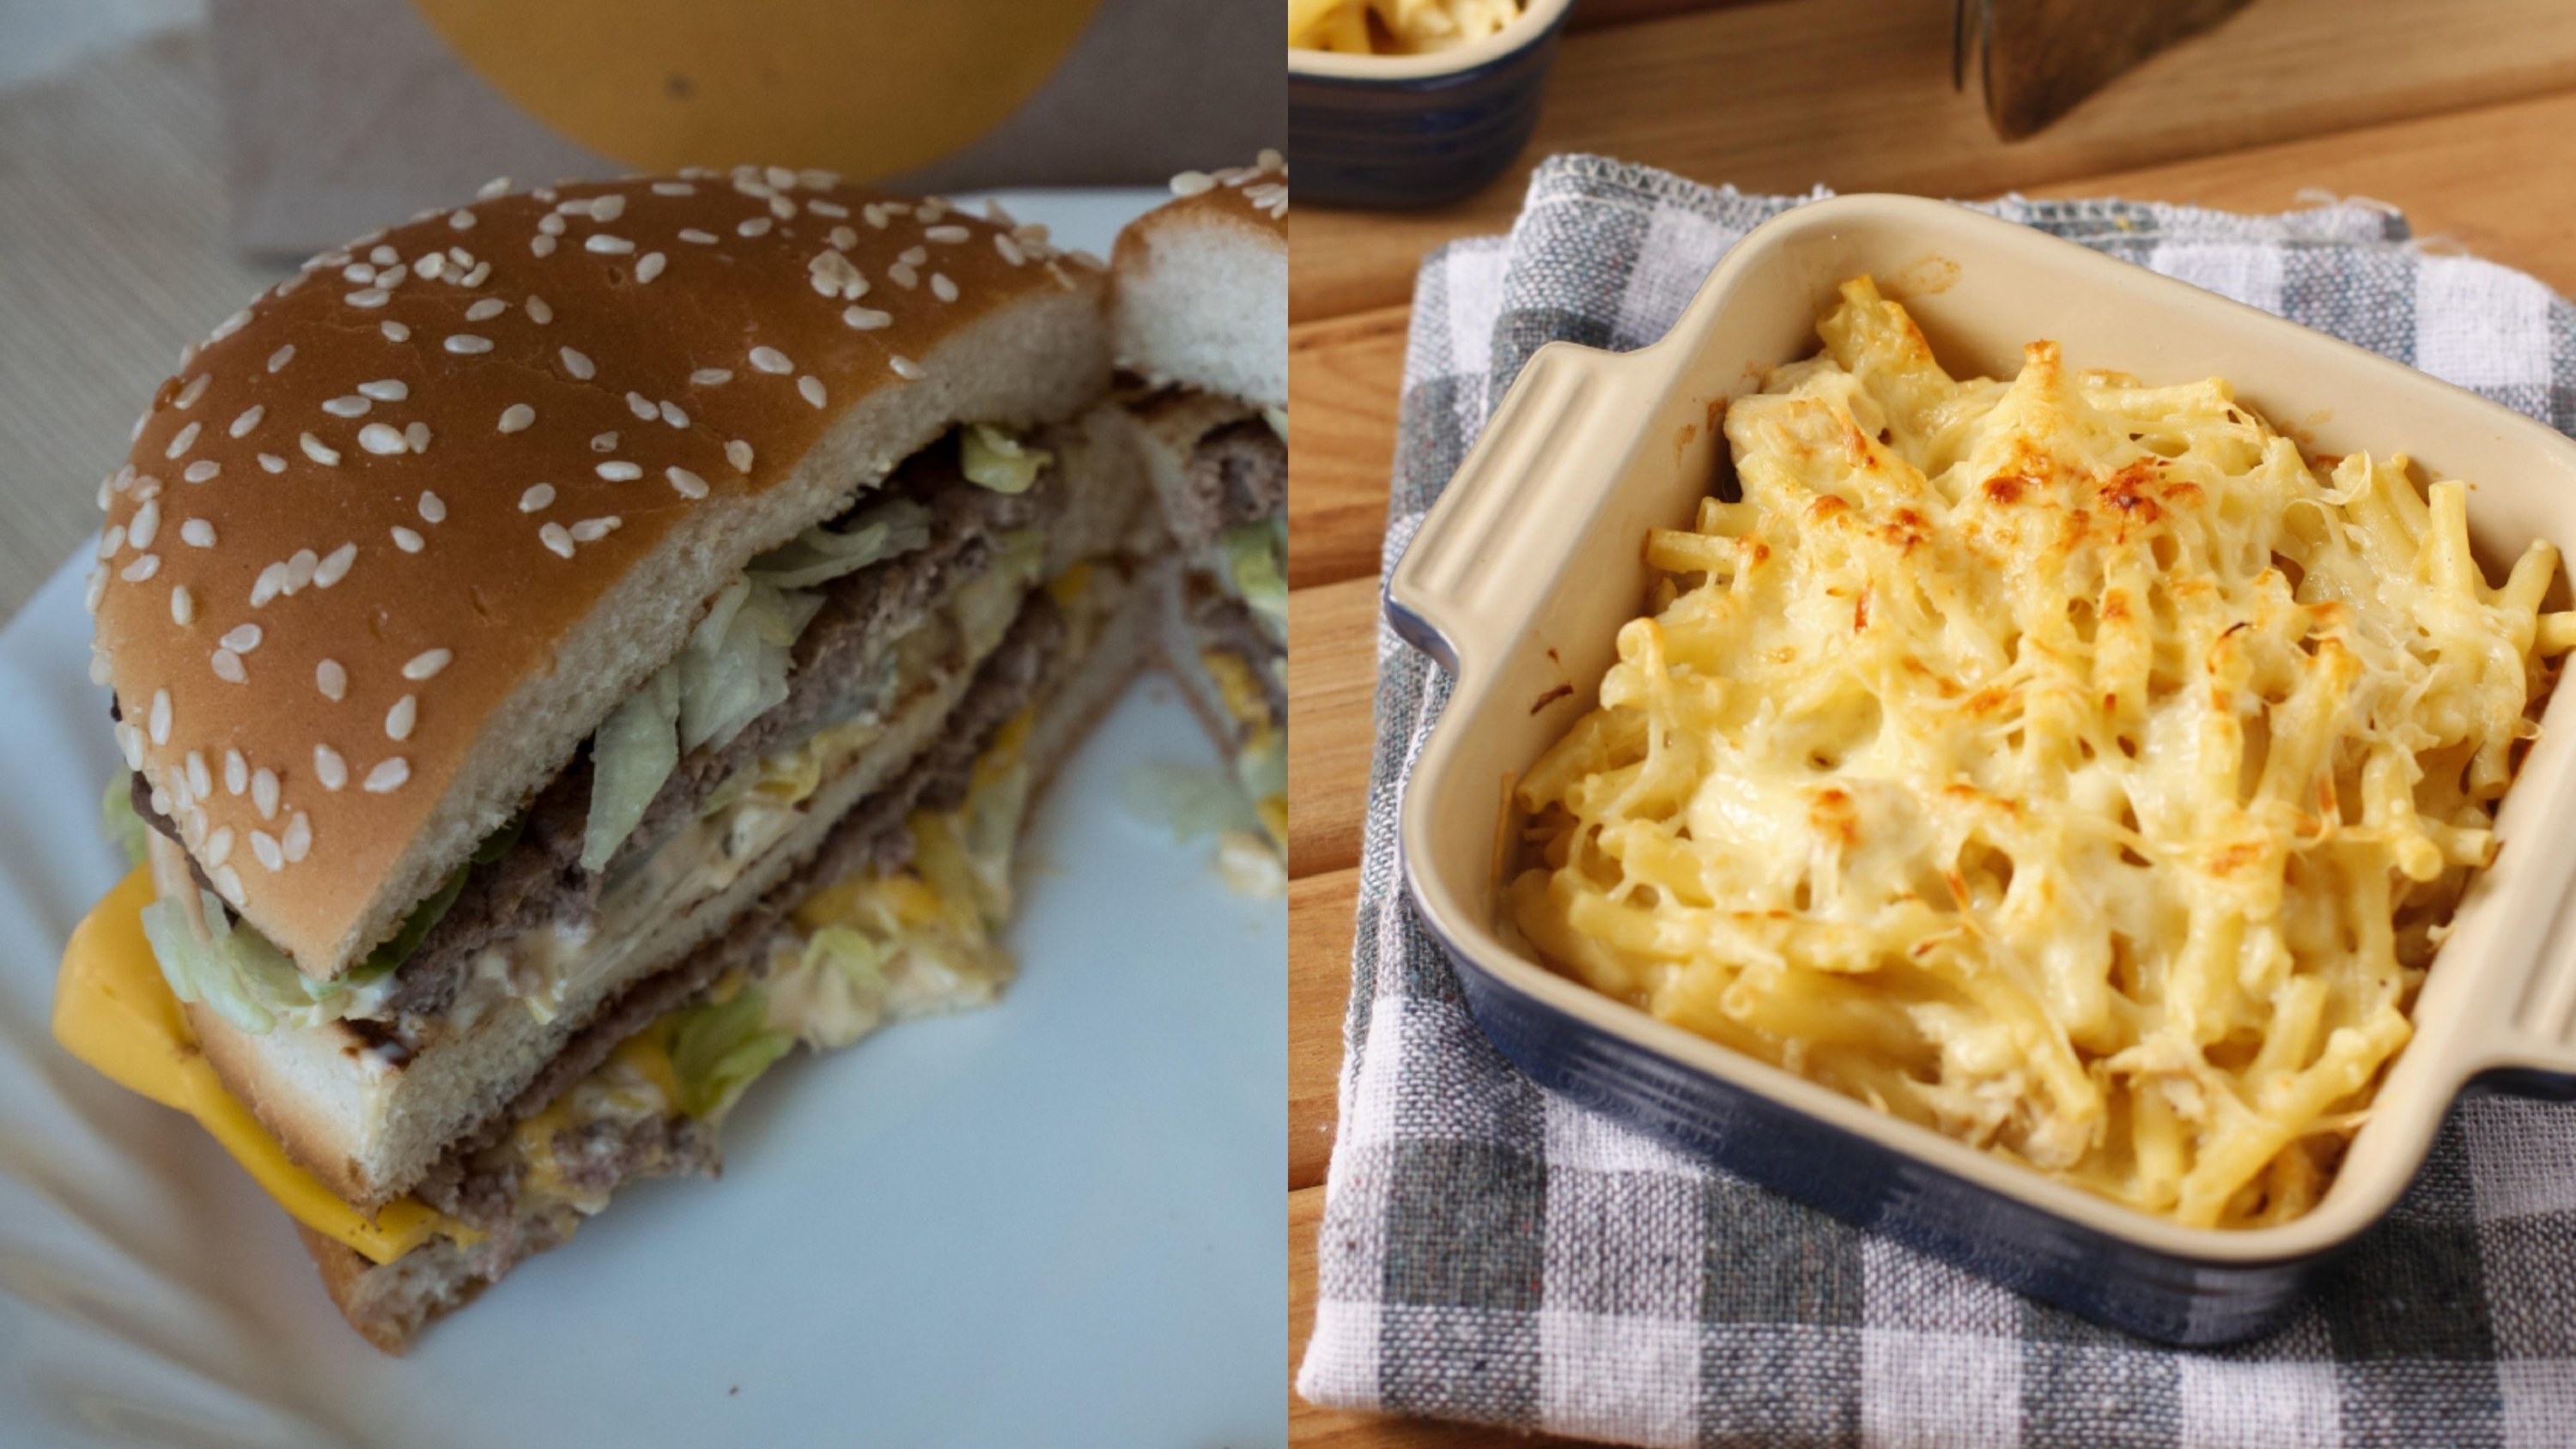 Cut out of a McDonald’s Big Mac sandwich / Mac and cheese in blue baking dish over blue and white checkered towel with old silver pasta picker